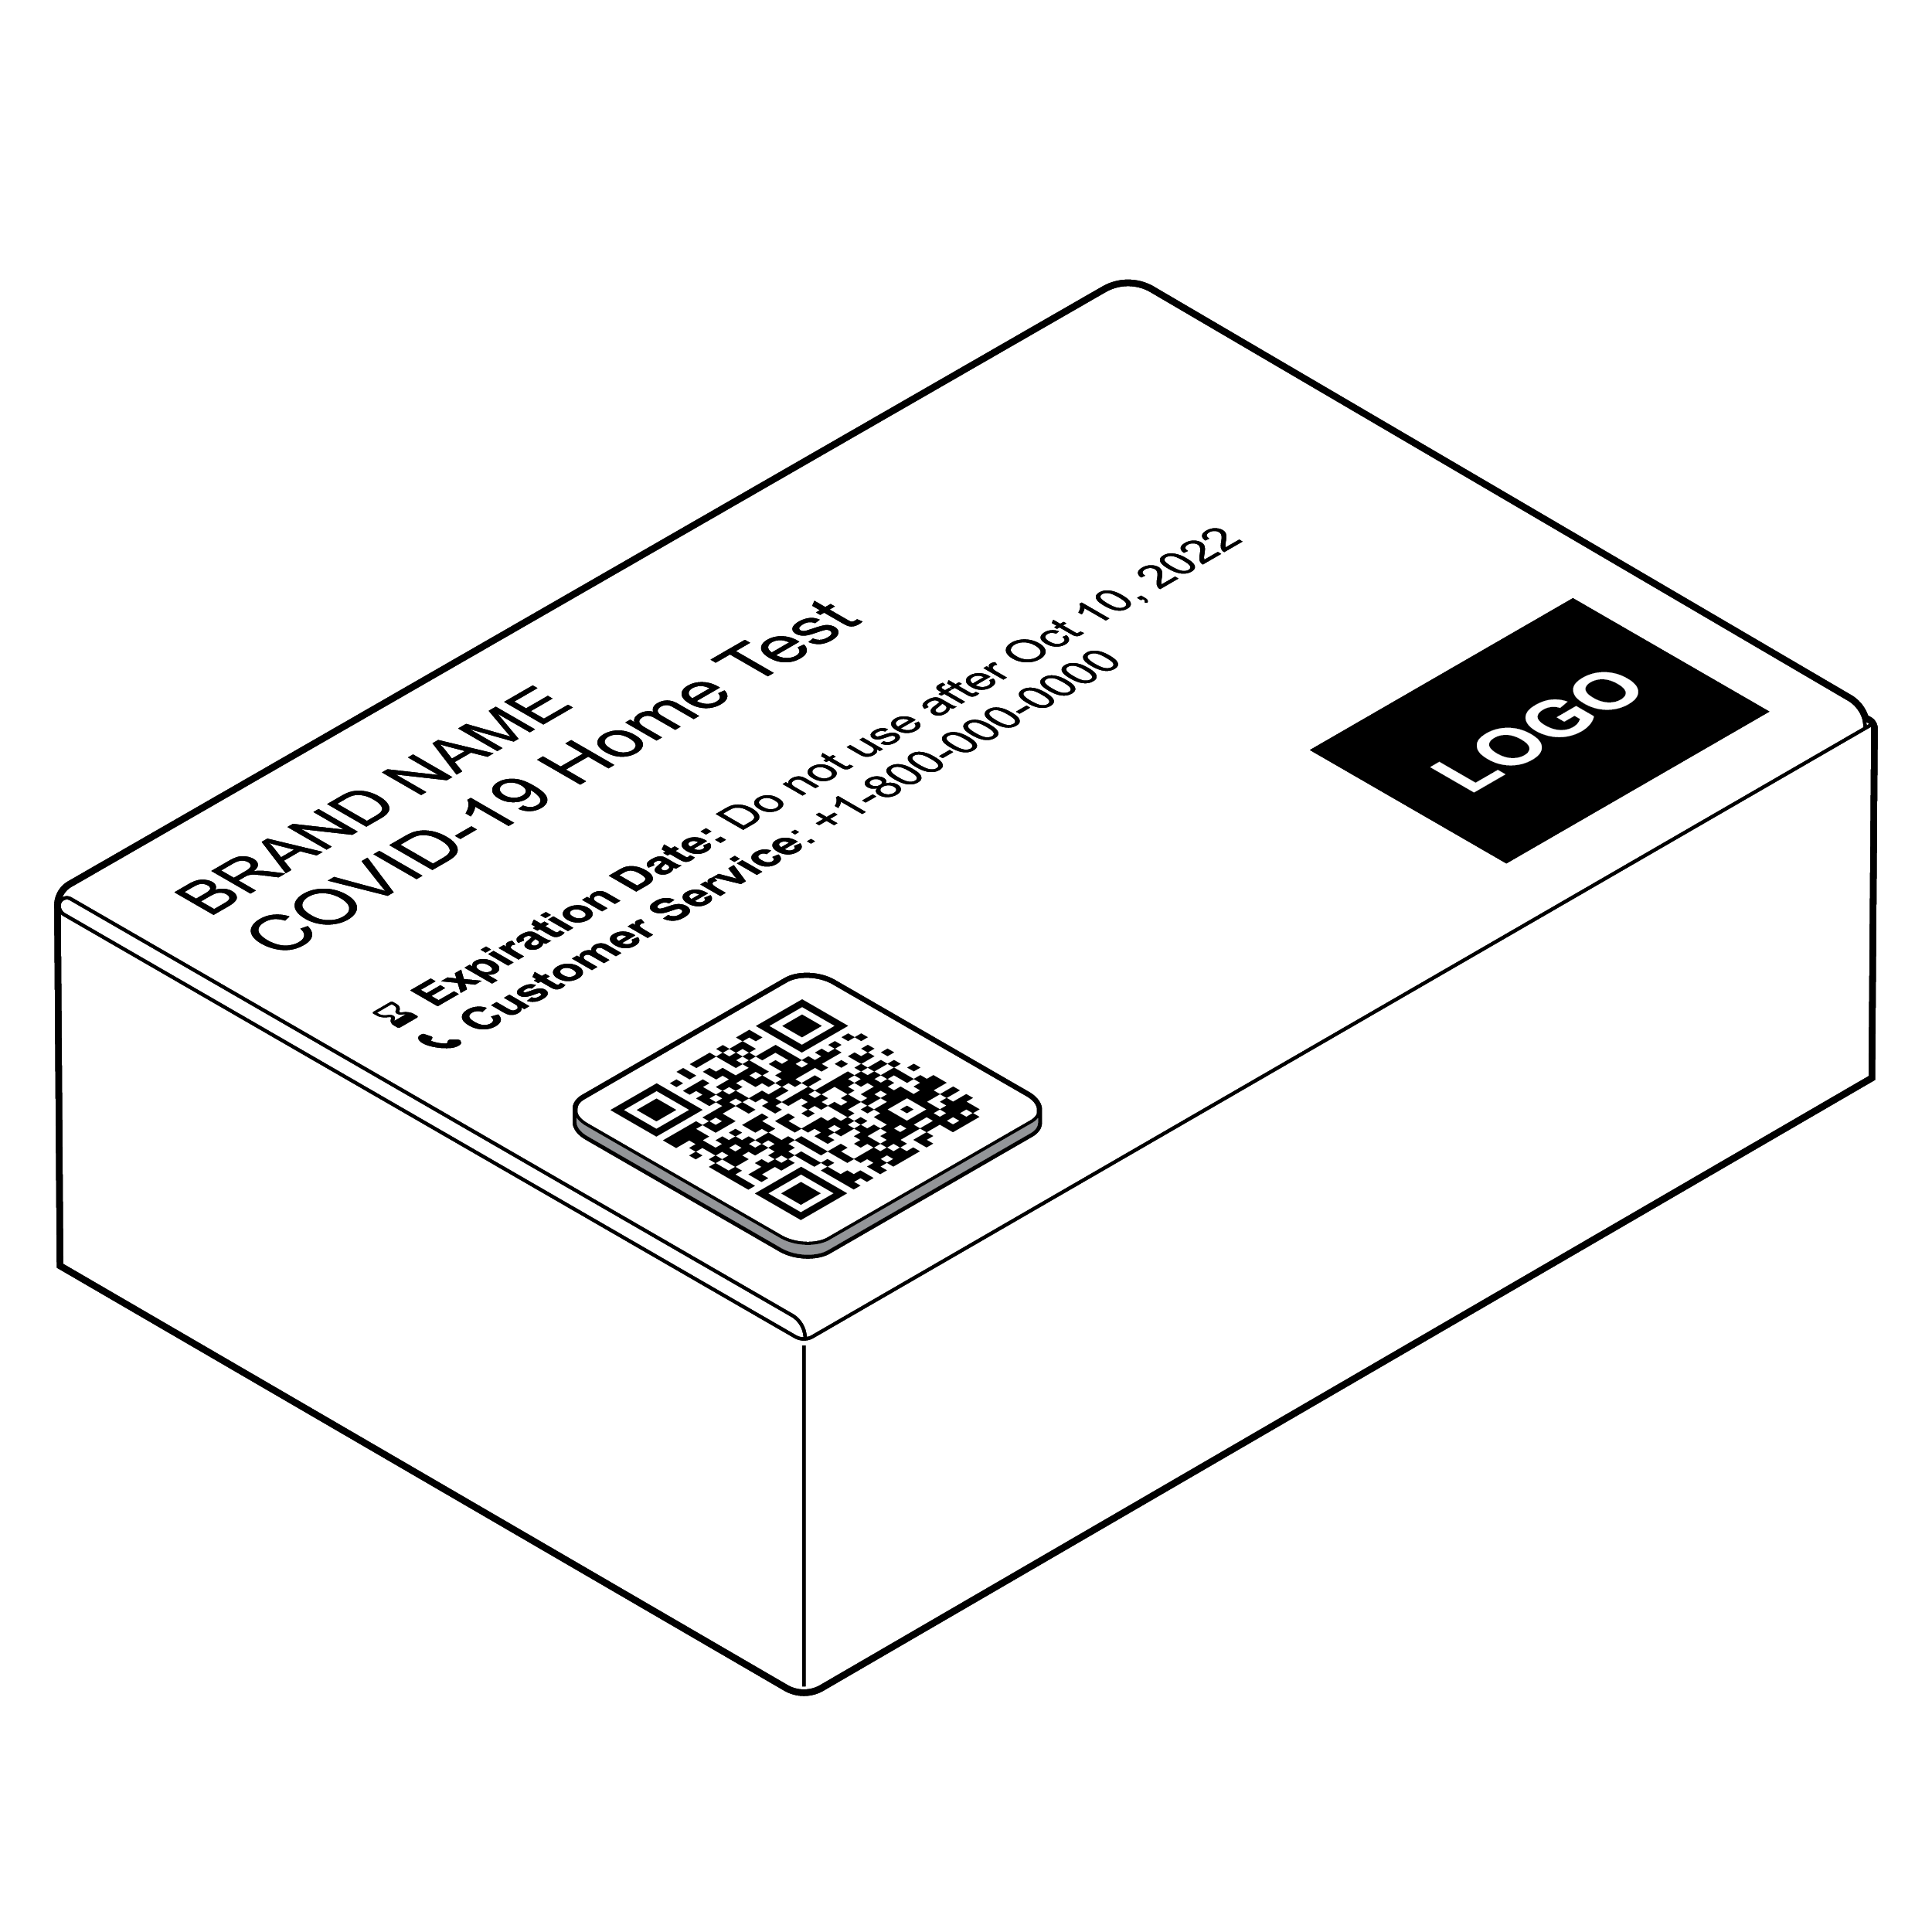 Line drawing of a box with clearly visible text, logo, and QR code.